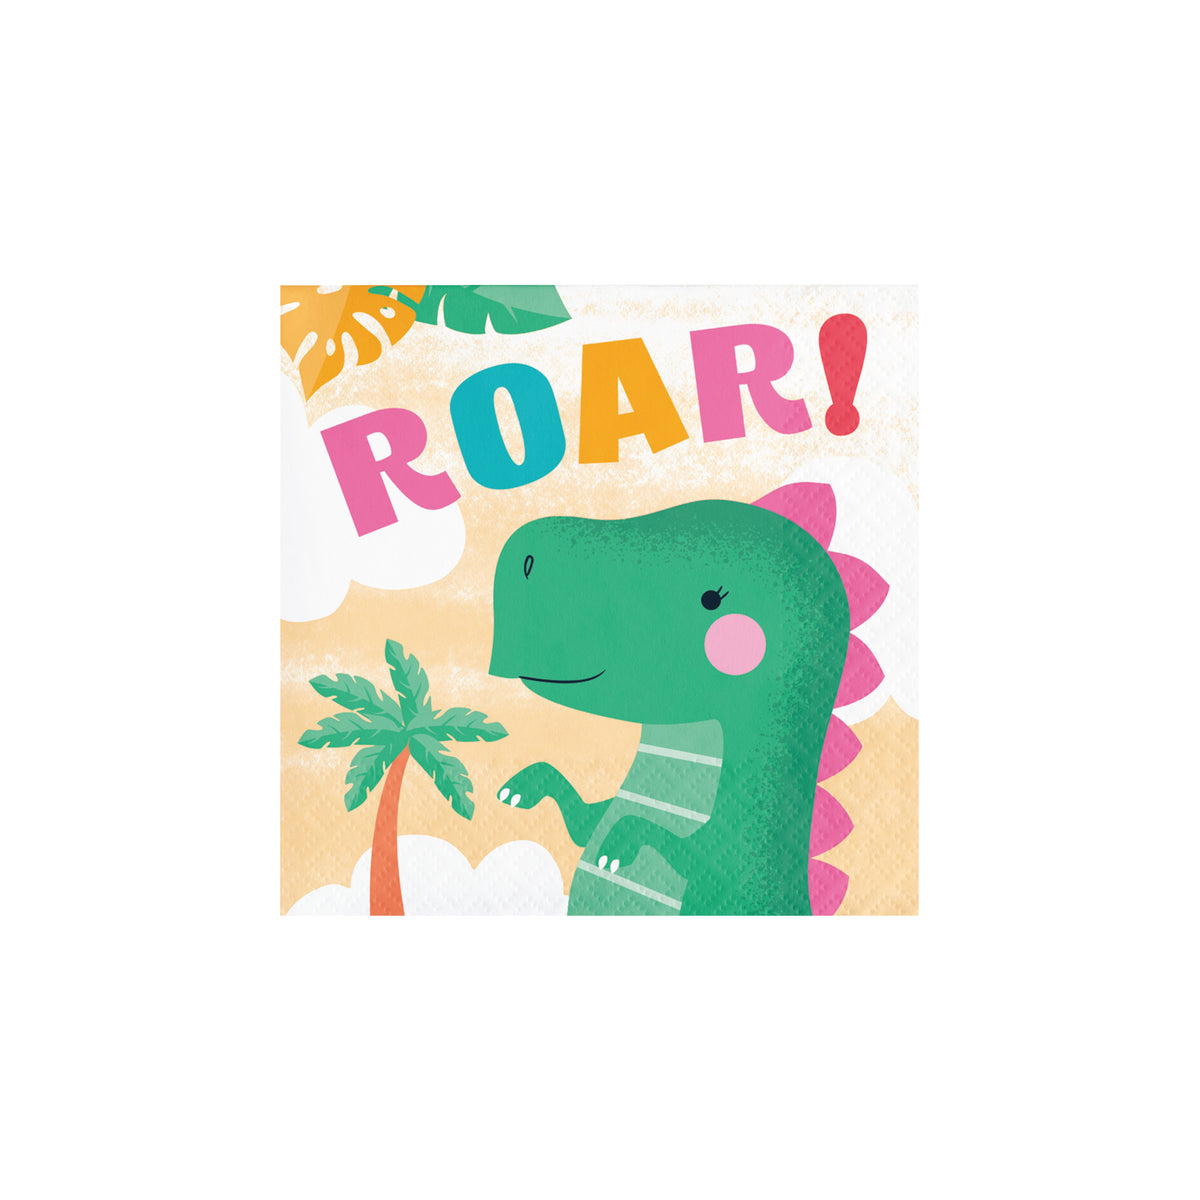 Cute Dinosaur Birthday Party Supplies Decorations for Kids - SUNBEAUTY